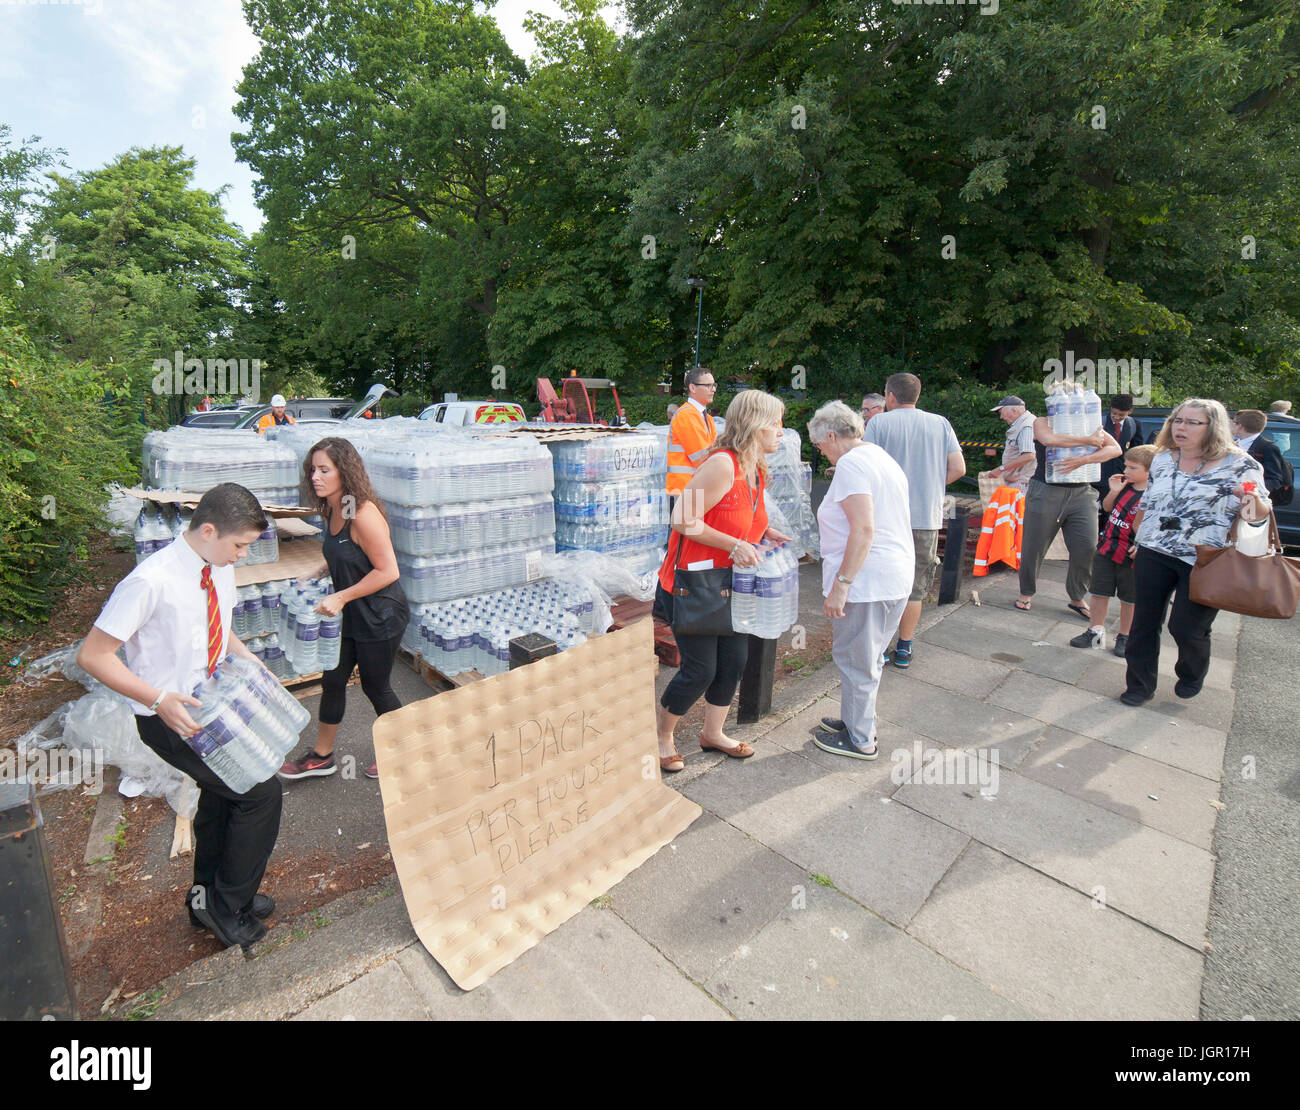 Biggin Hill, Bromley, London, UK. 10th July, 2017. London residents wake up to no water supply, in the TN16, TN14, CRO, BR2 areas. Thames Water hand out emergency water supplies after a major burst pipe two days ago. Credit: Tony Watson/Alamy Live News Stock Photo